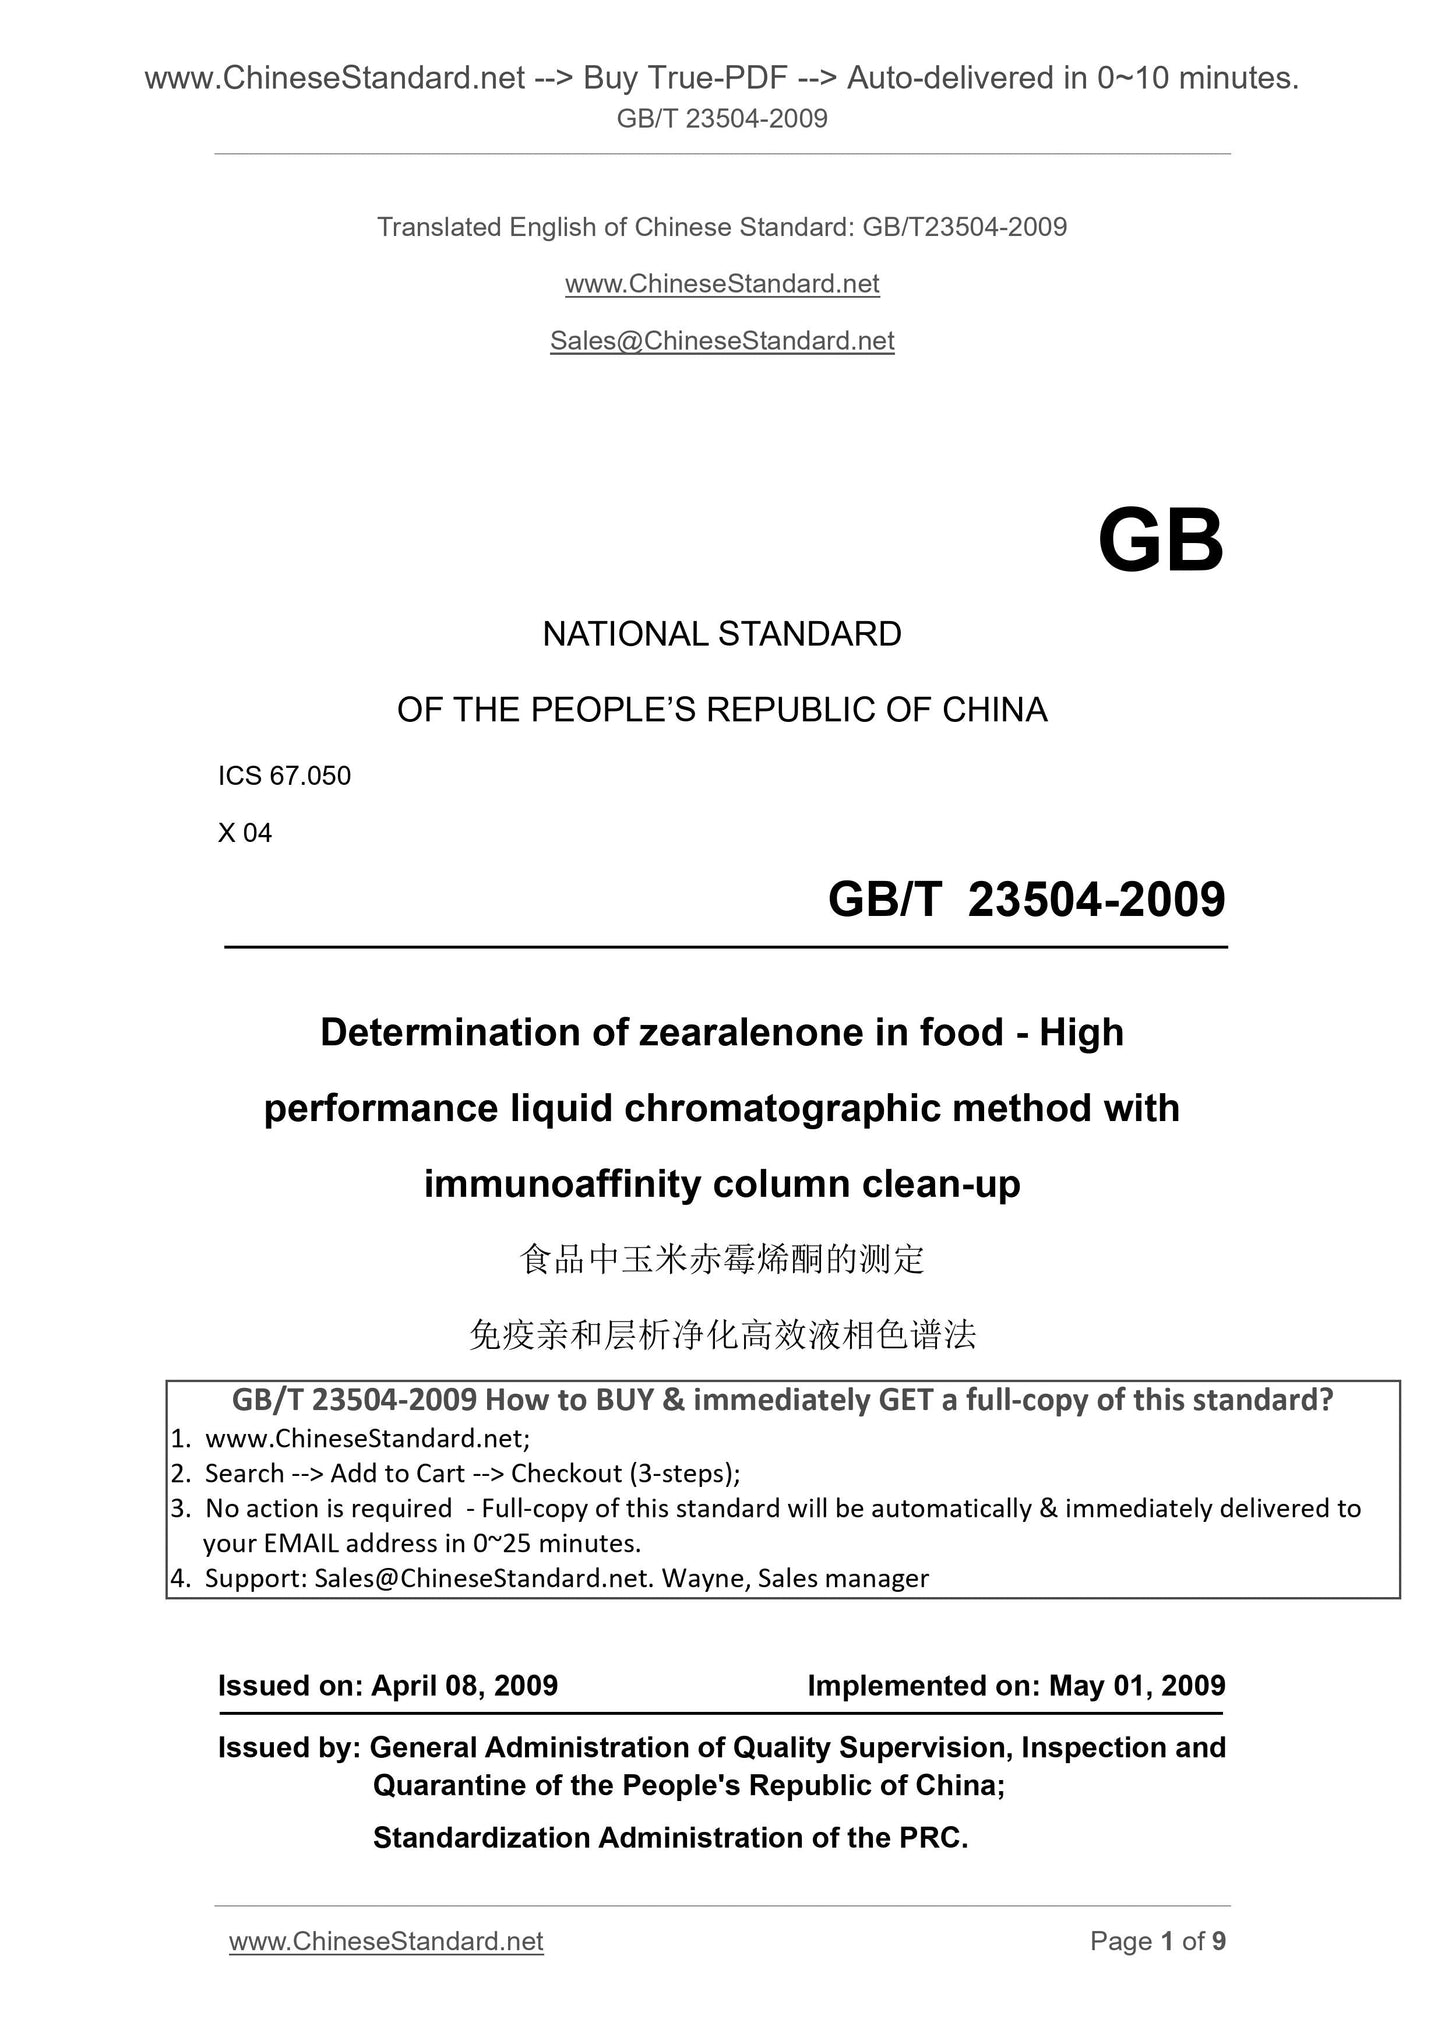 GB/T 23504-2009 Page 1